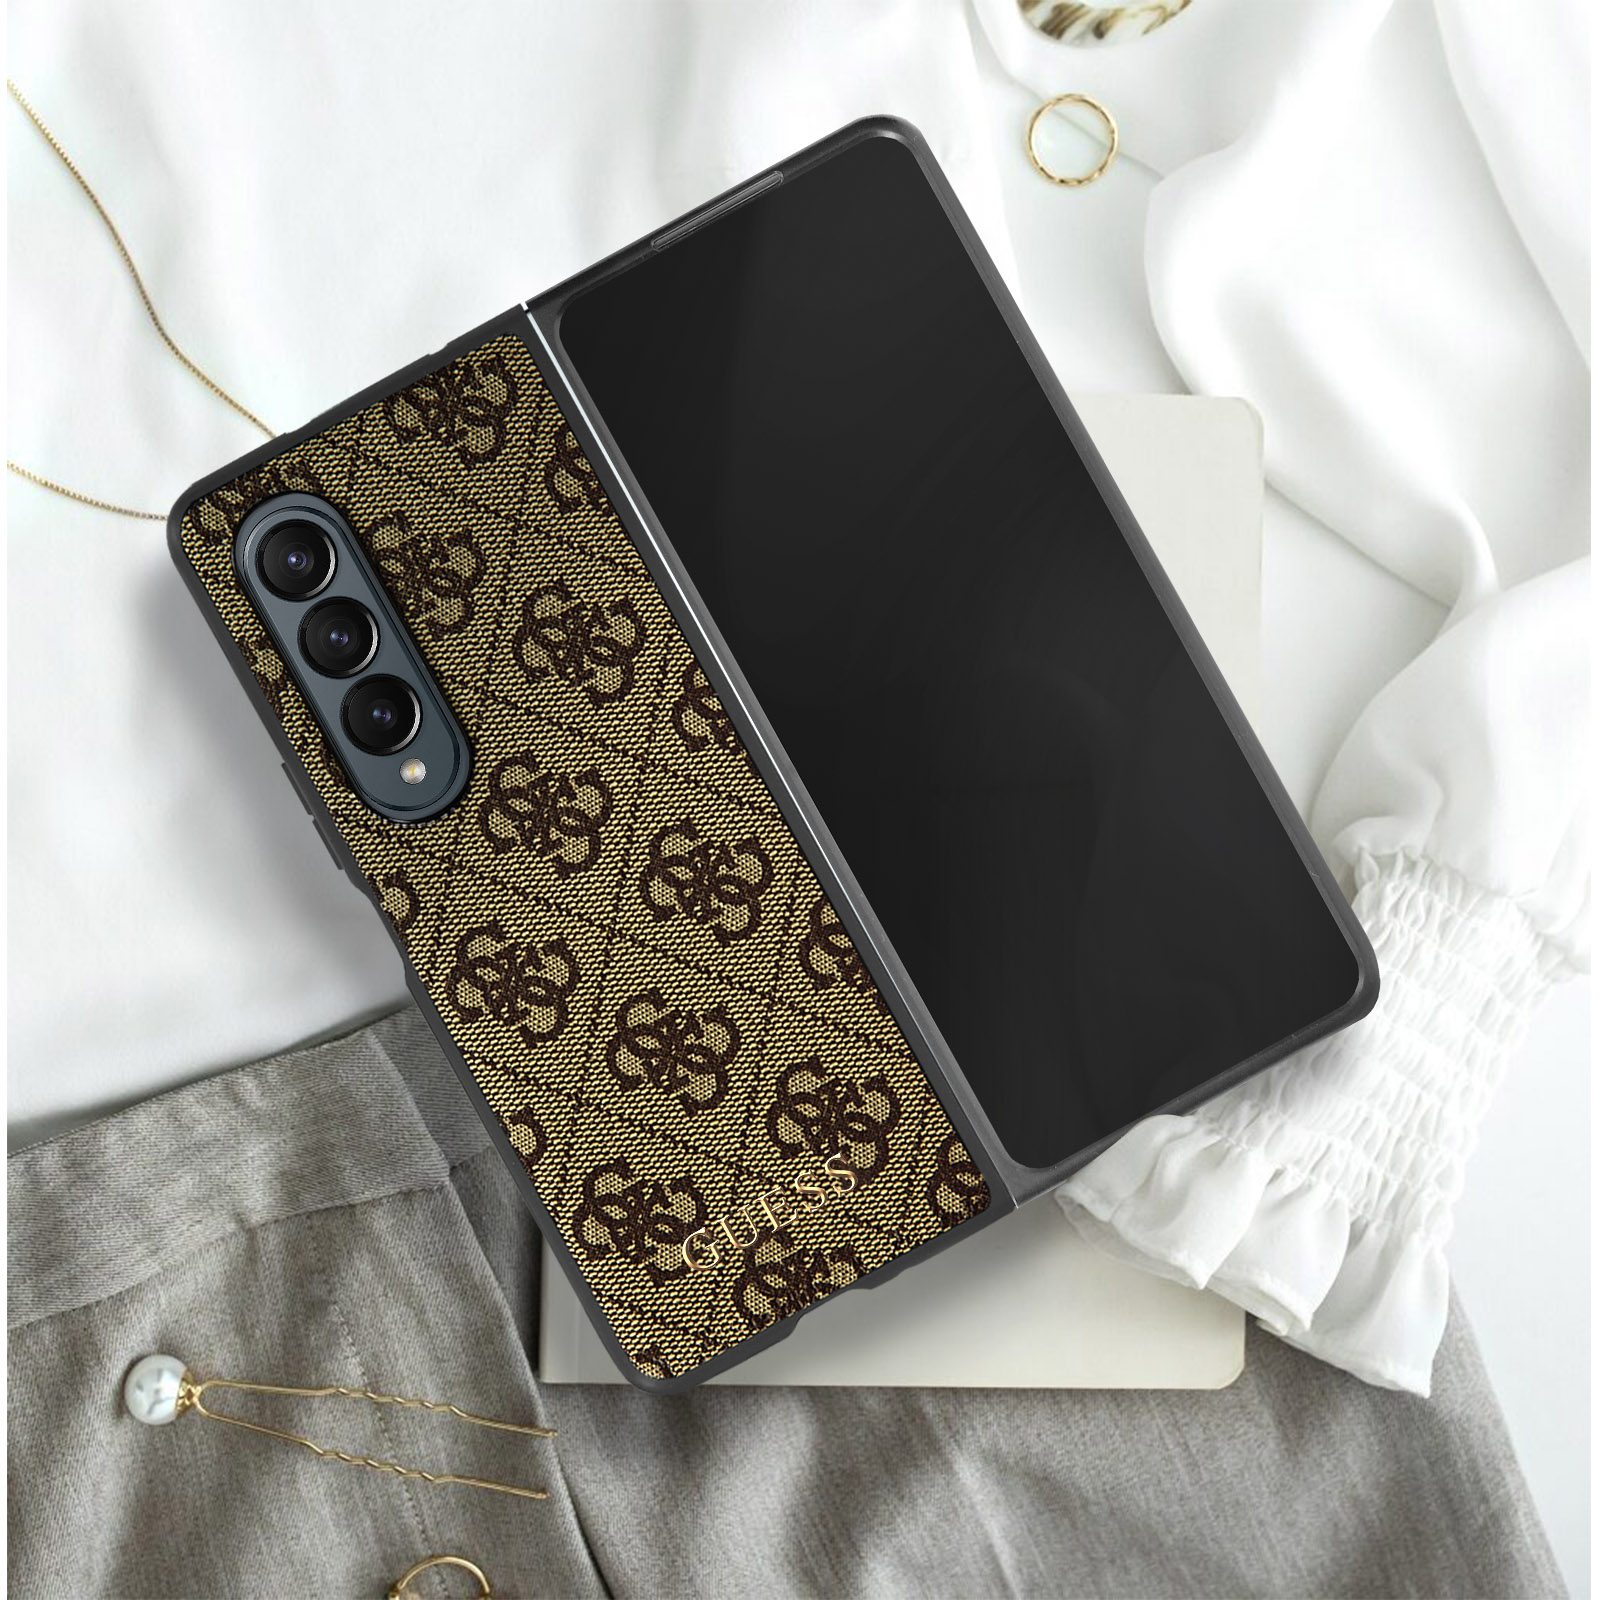 Charms Design Collection Z GUESS Braun Hülle, Backcover, Fold4, Galaxy Samsung, 4G